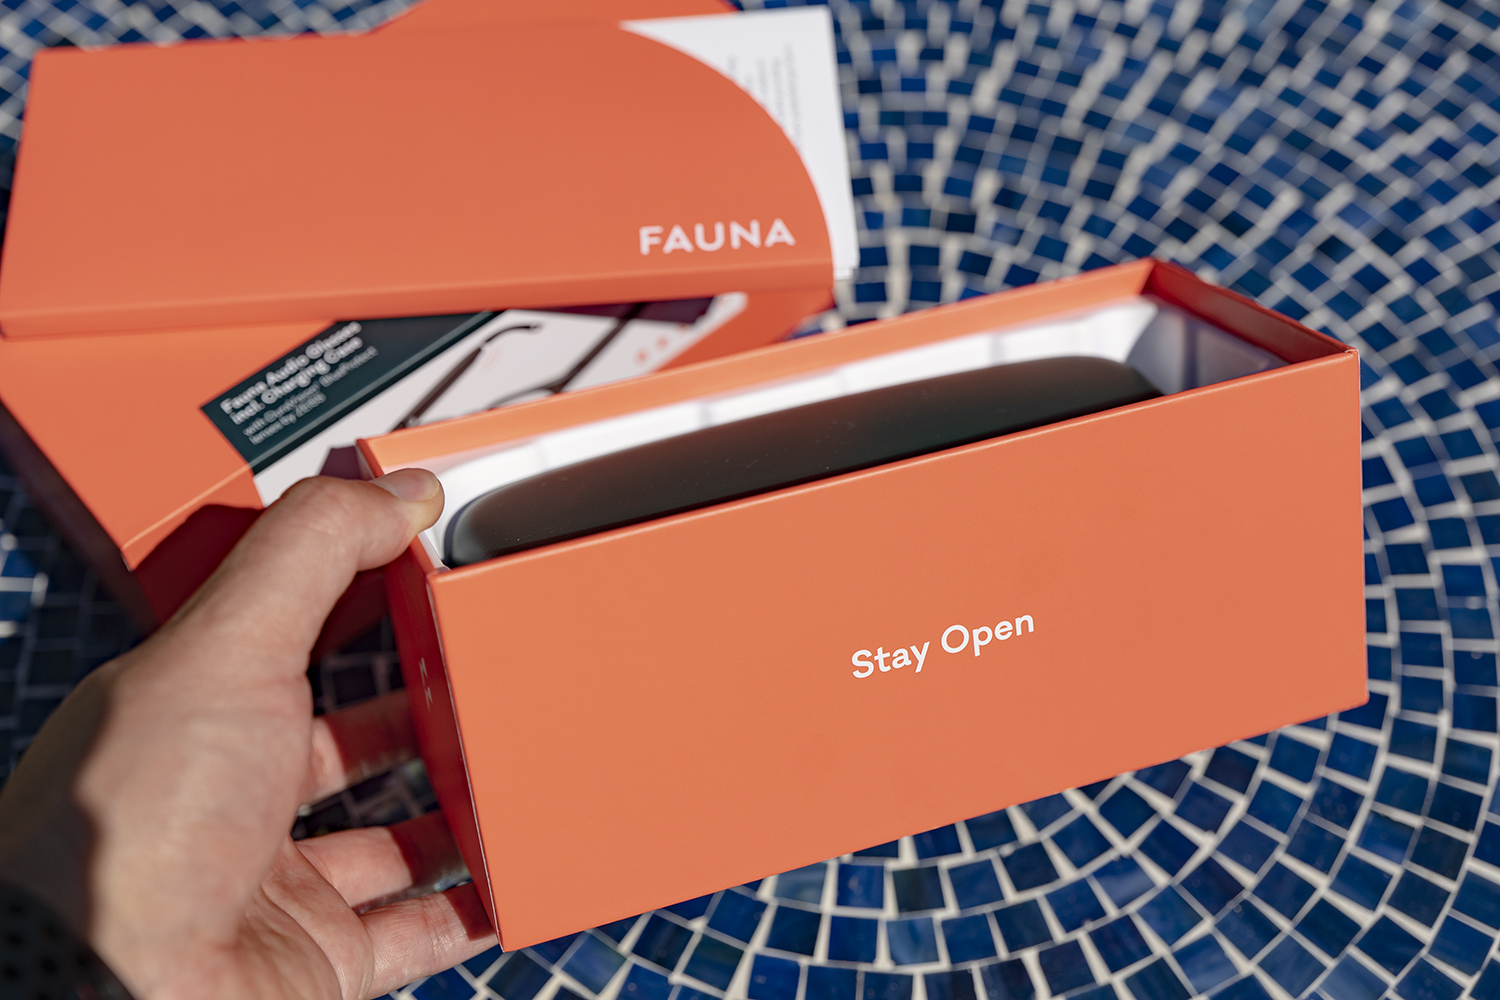 fauna audio glasses review 10